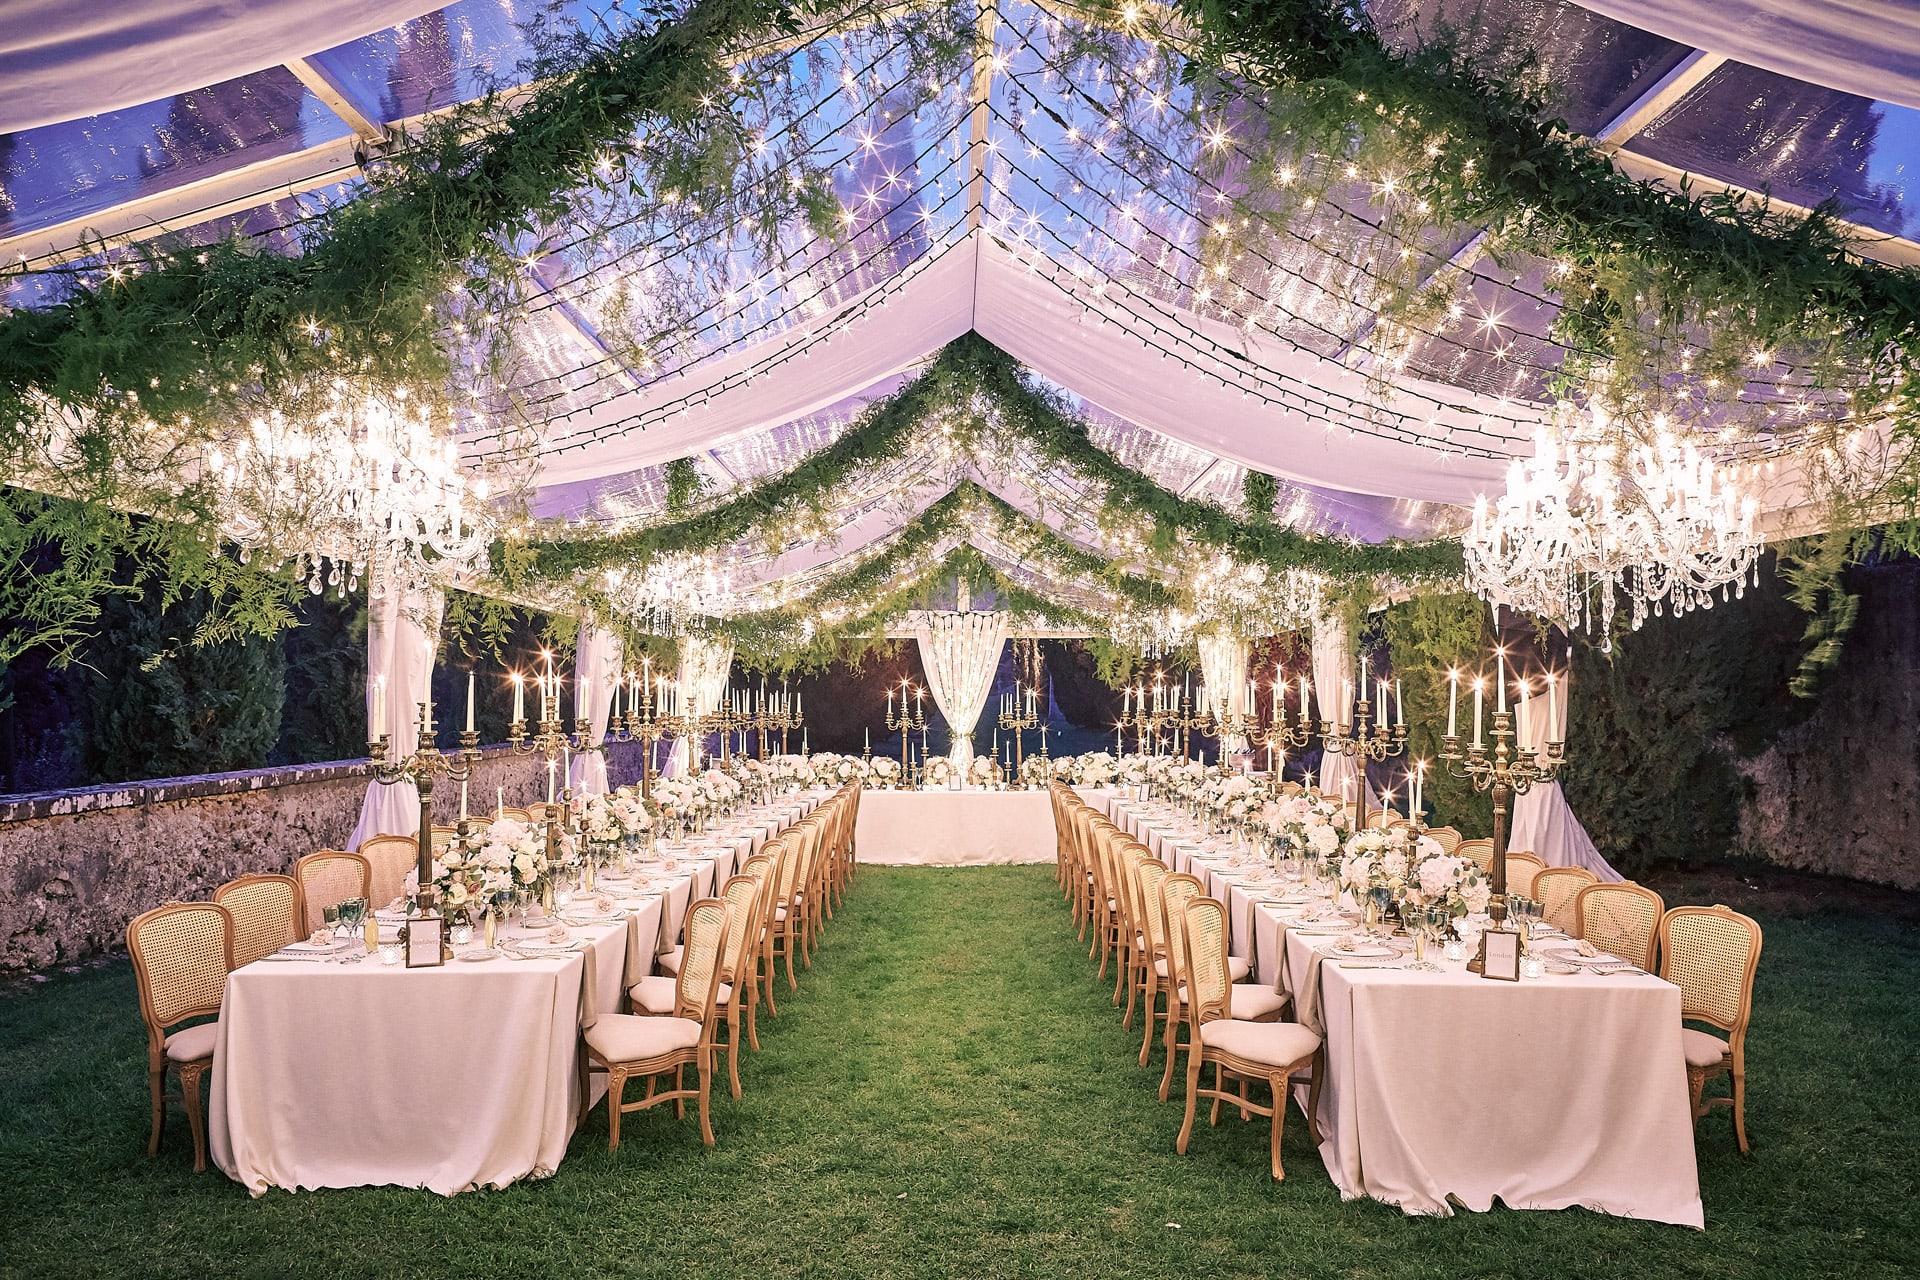 Preludio offers marquees in various sizes and styles for the perfect event